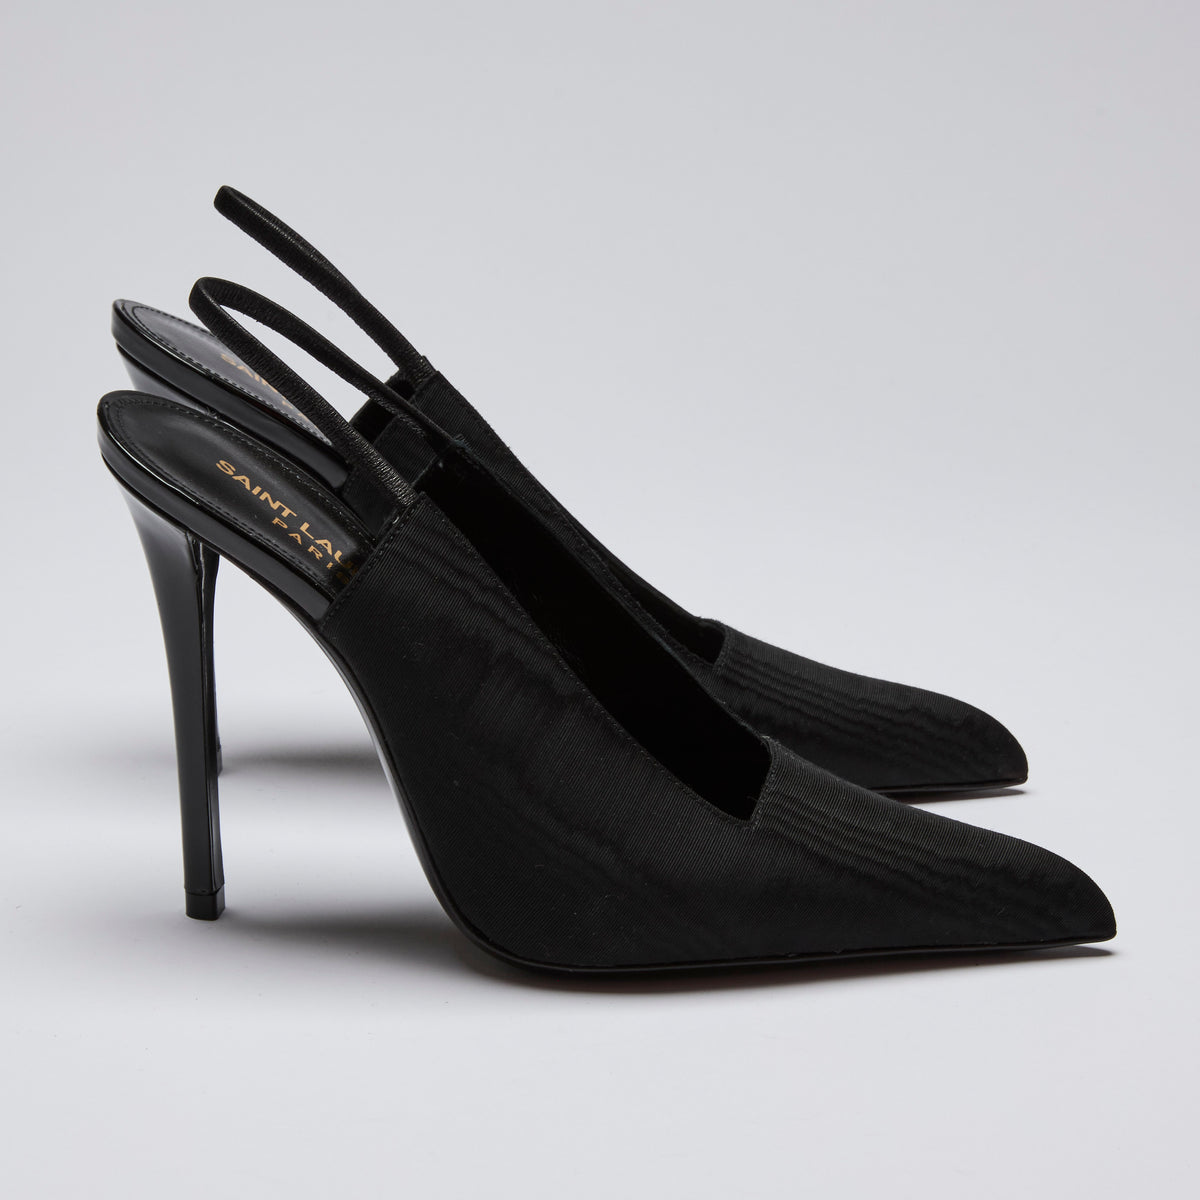 Excellent Pre-Loved Black Fabric Point Toe Sling Back Heels with Square Cut Out. (side)